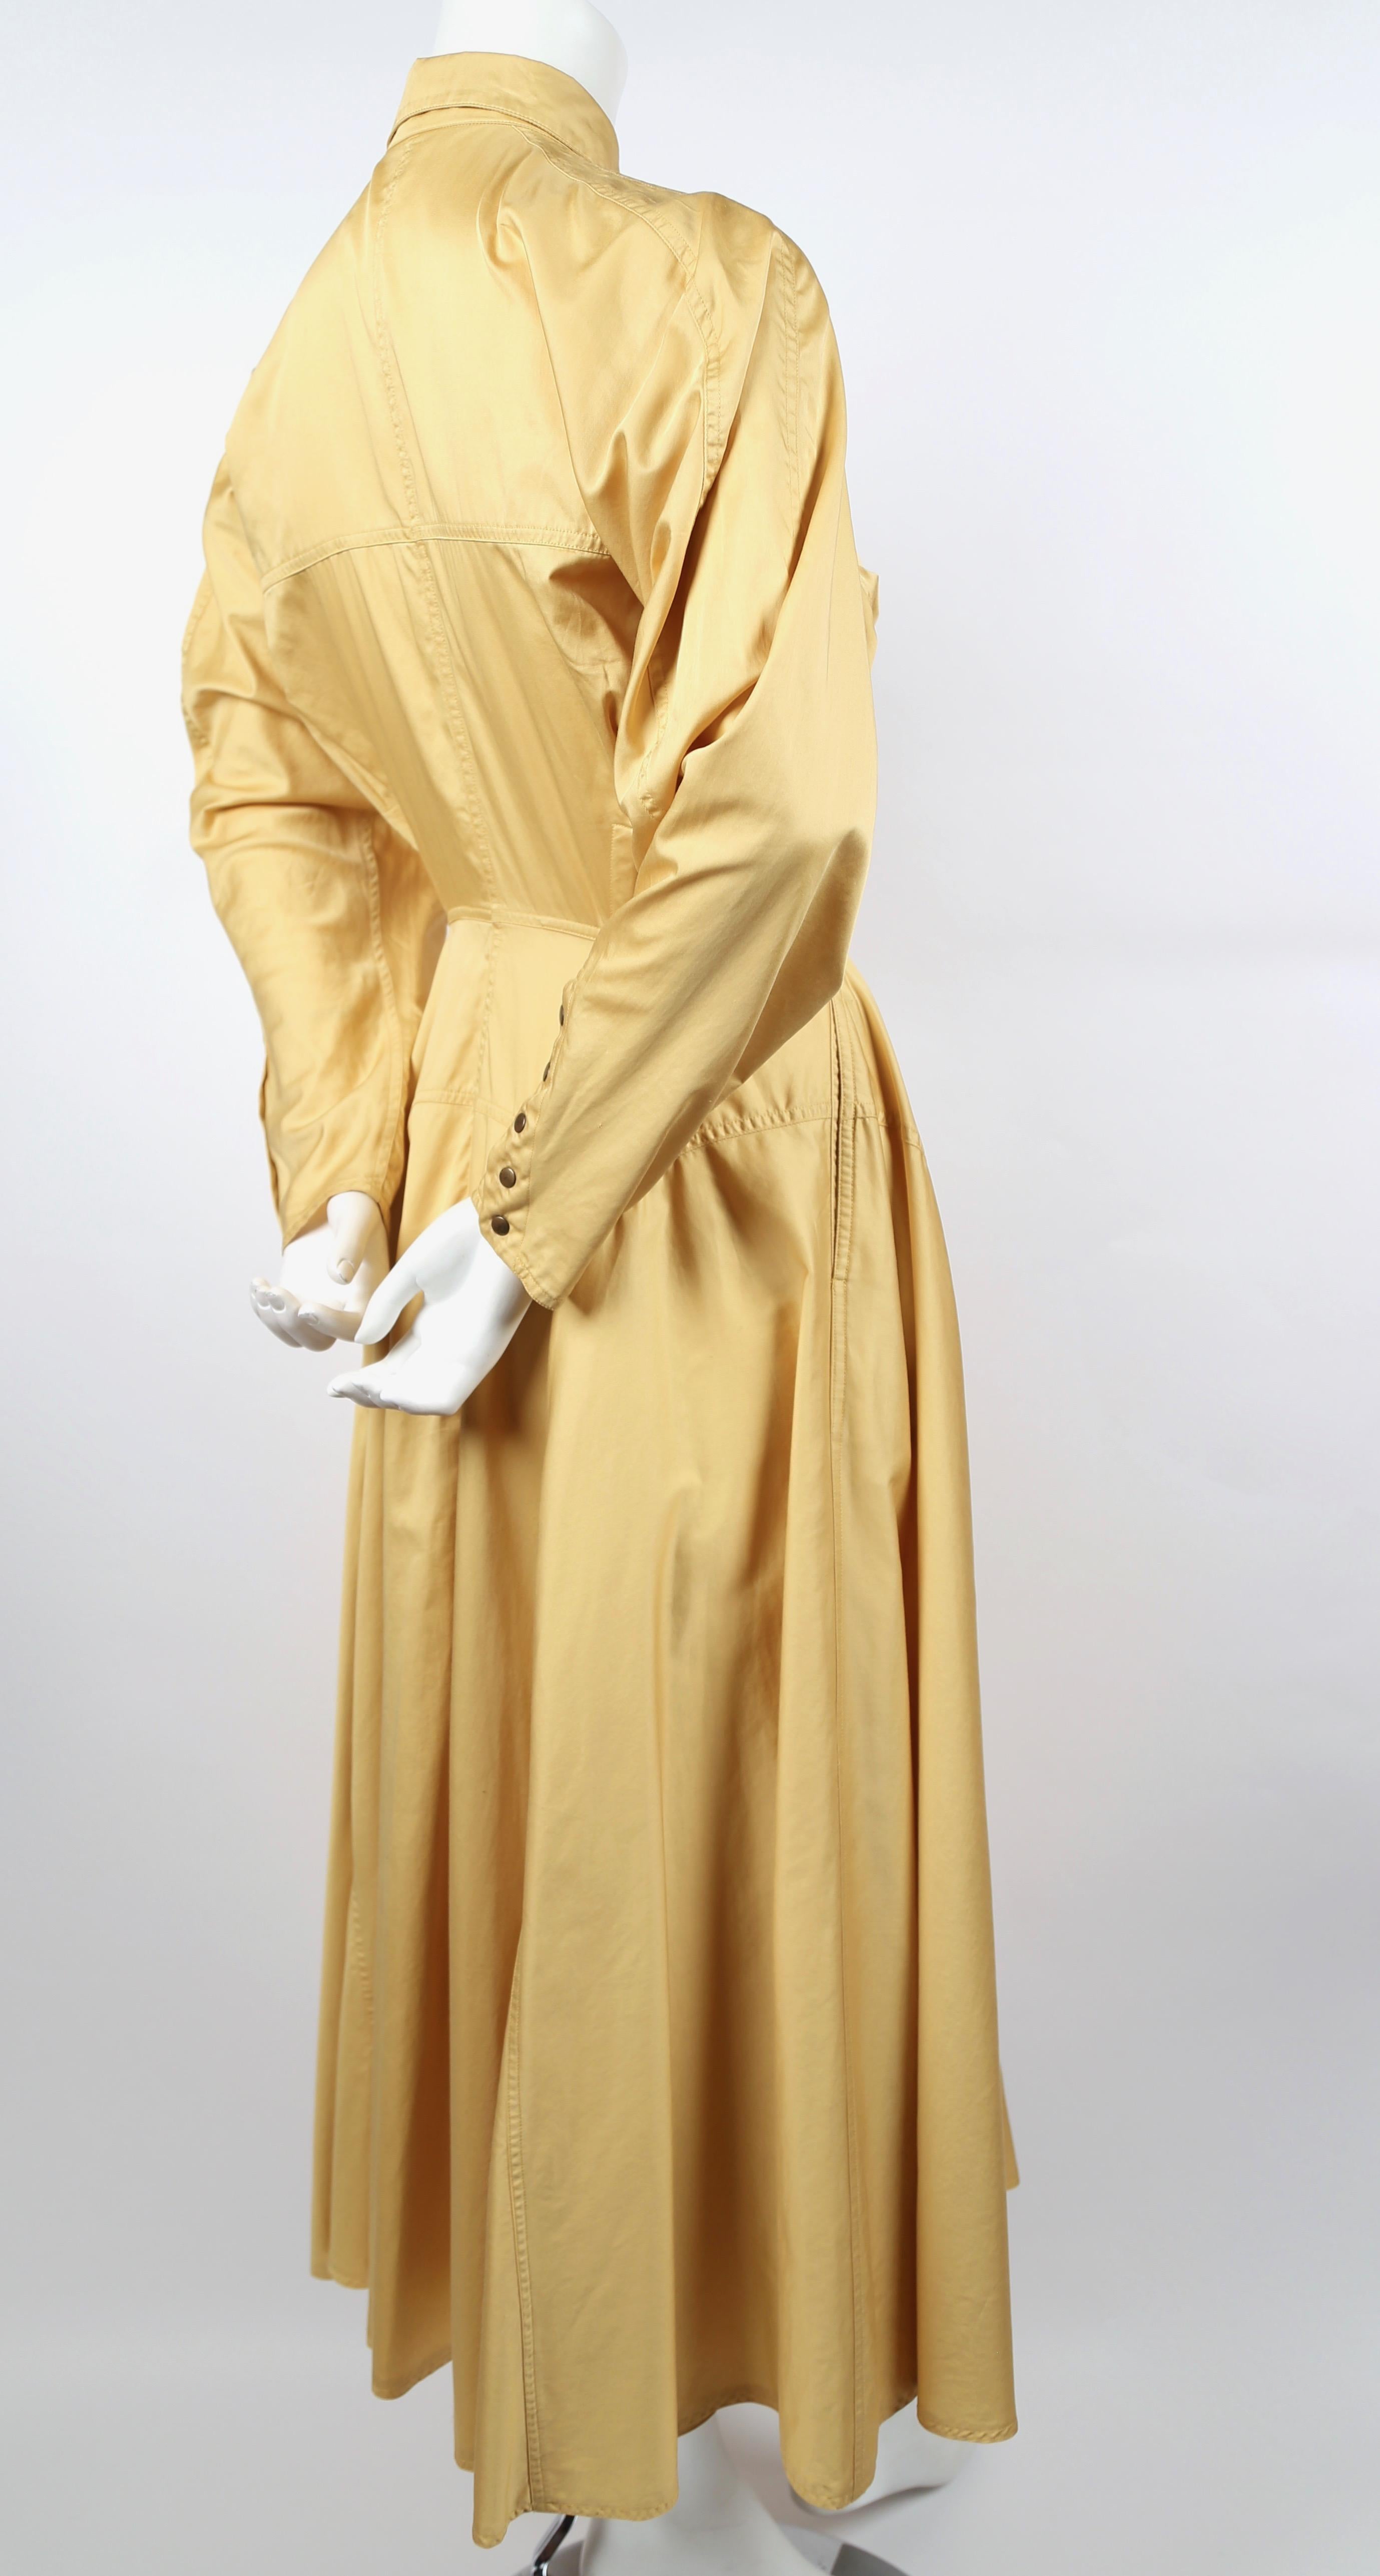 Very rare, light saffron colored cotton blend dress with fully seamed skirt and snap closure from Azzedine Alaia dating to the 1980's. Dress has a very flattering, unique shape. Labeled a French size 40 however this would best fit a French 38 or